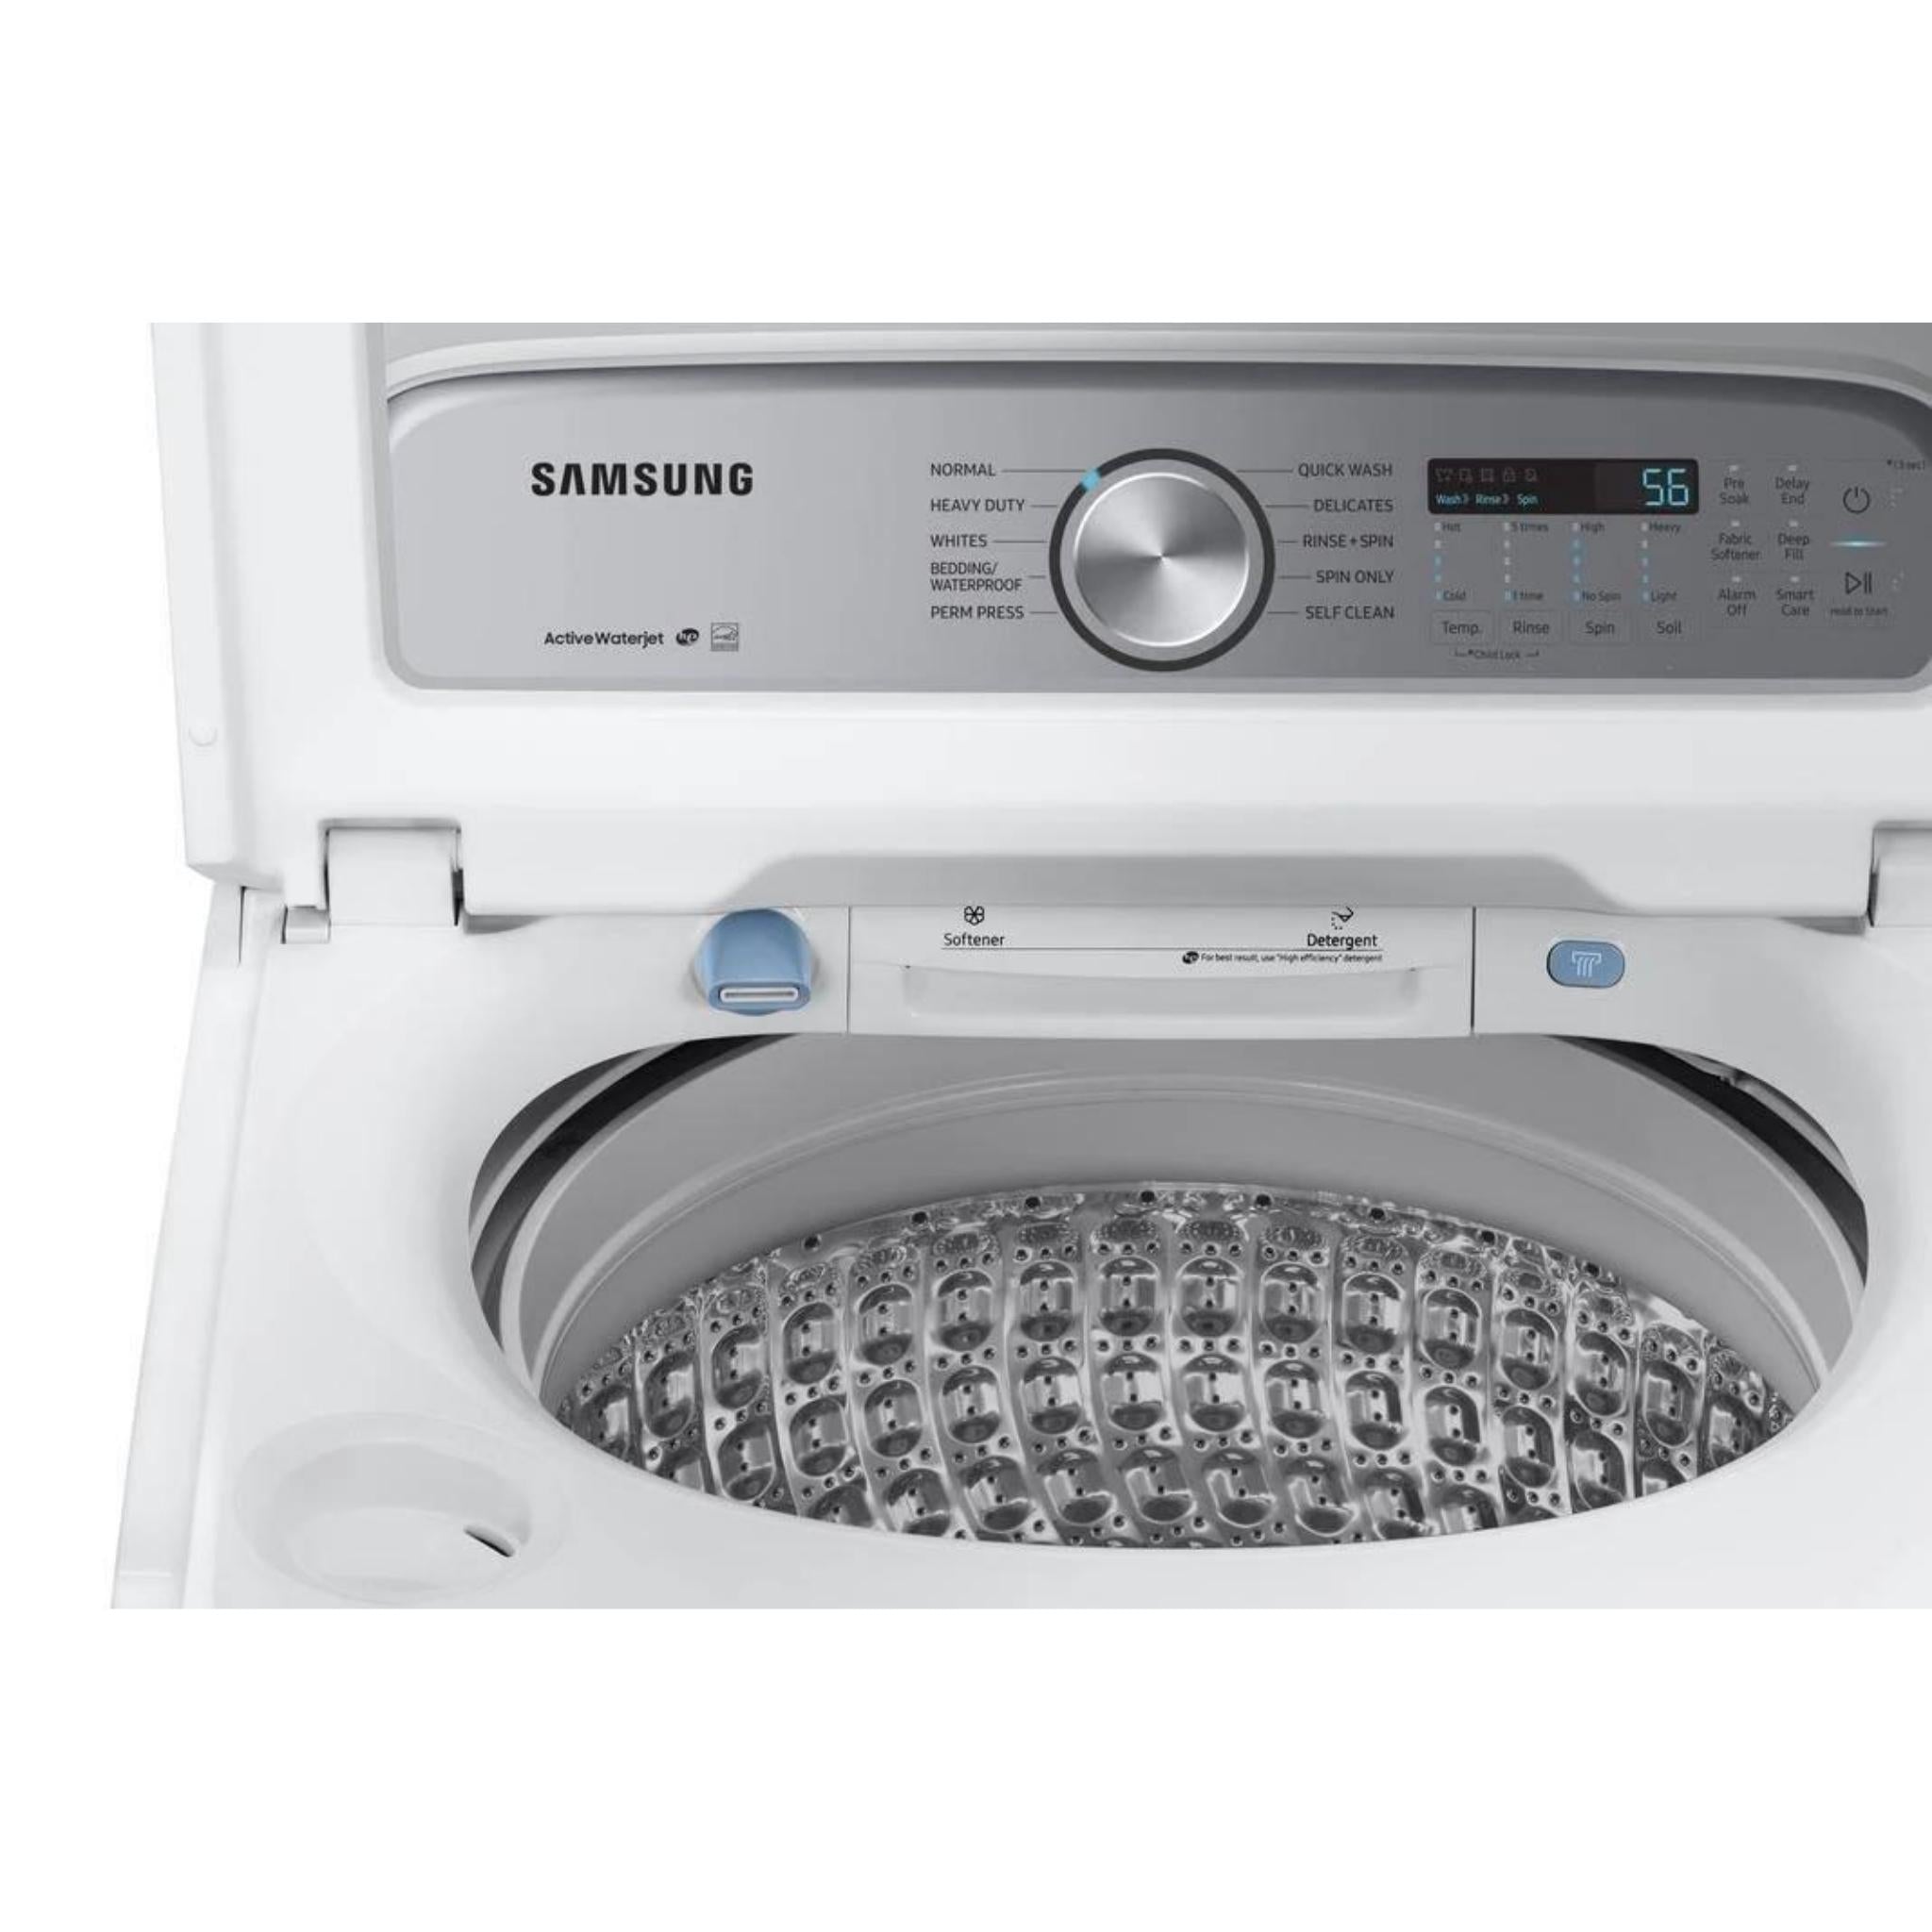 Samsung 5.8 cu.ft. Top Load Washer with EZ Access Drum